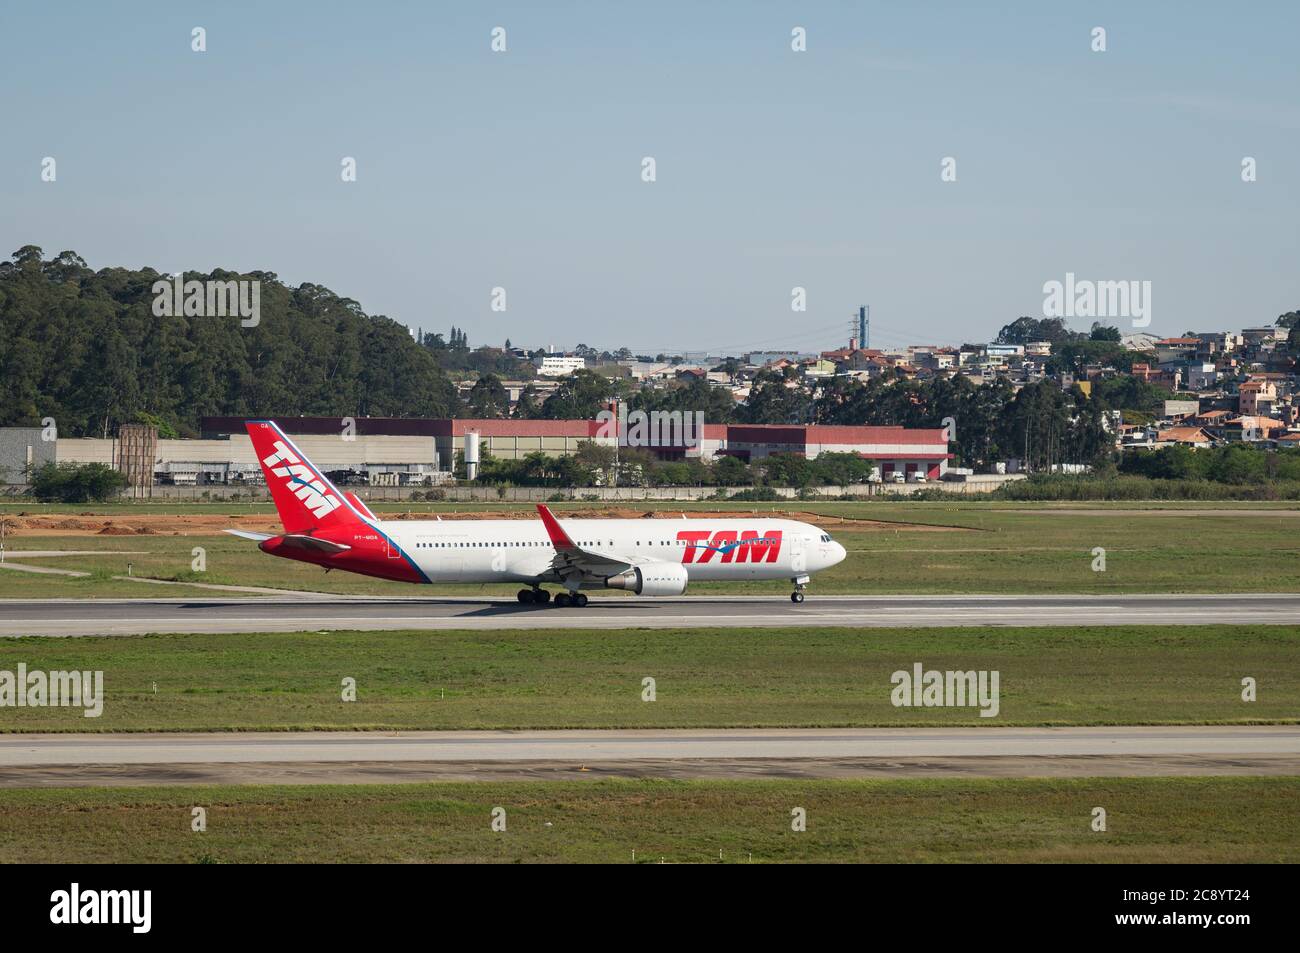 TAM Airlines Boeing 767-316ER (Wide-body twin engine airliner - Reg. PT-MOA) during takeoff run on runway 27R of Sao Paulo/Guarulhos Intl. Airport. Stock Photo